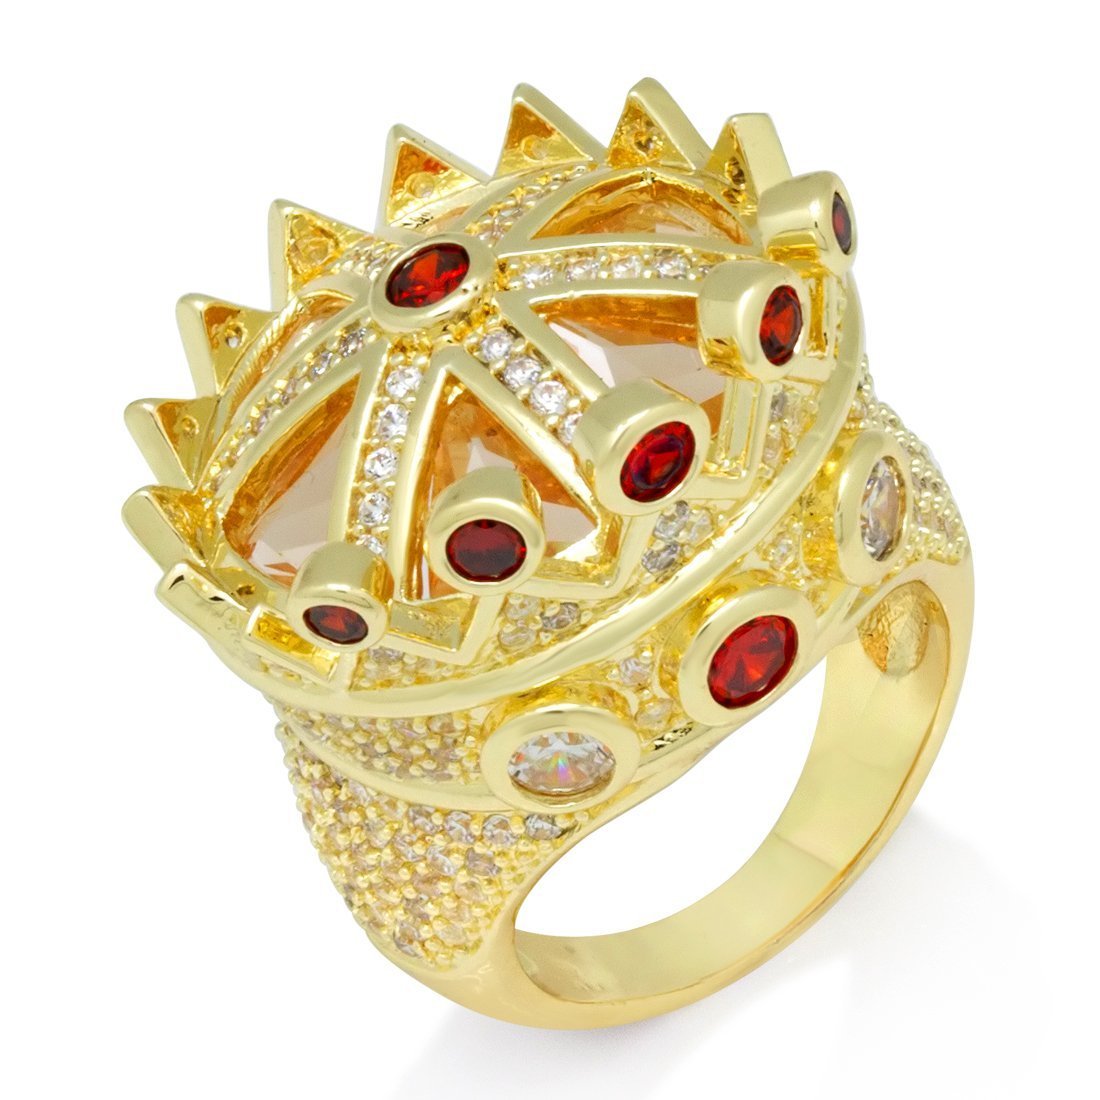 Men's Crown Ring in 18k Gold with Diamonds